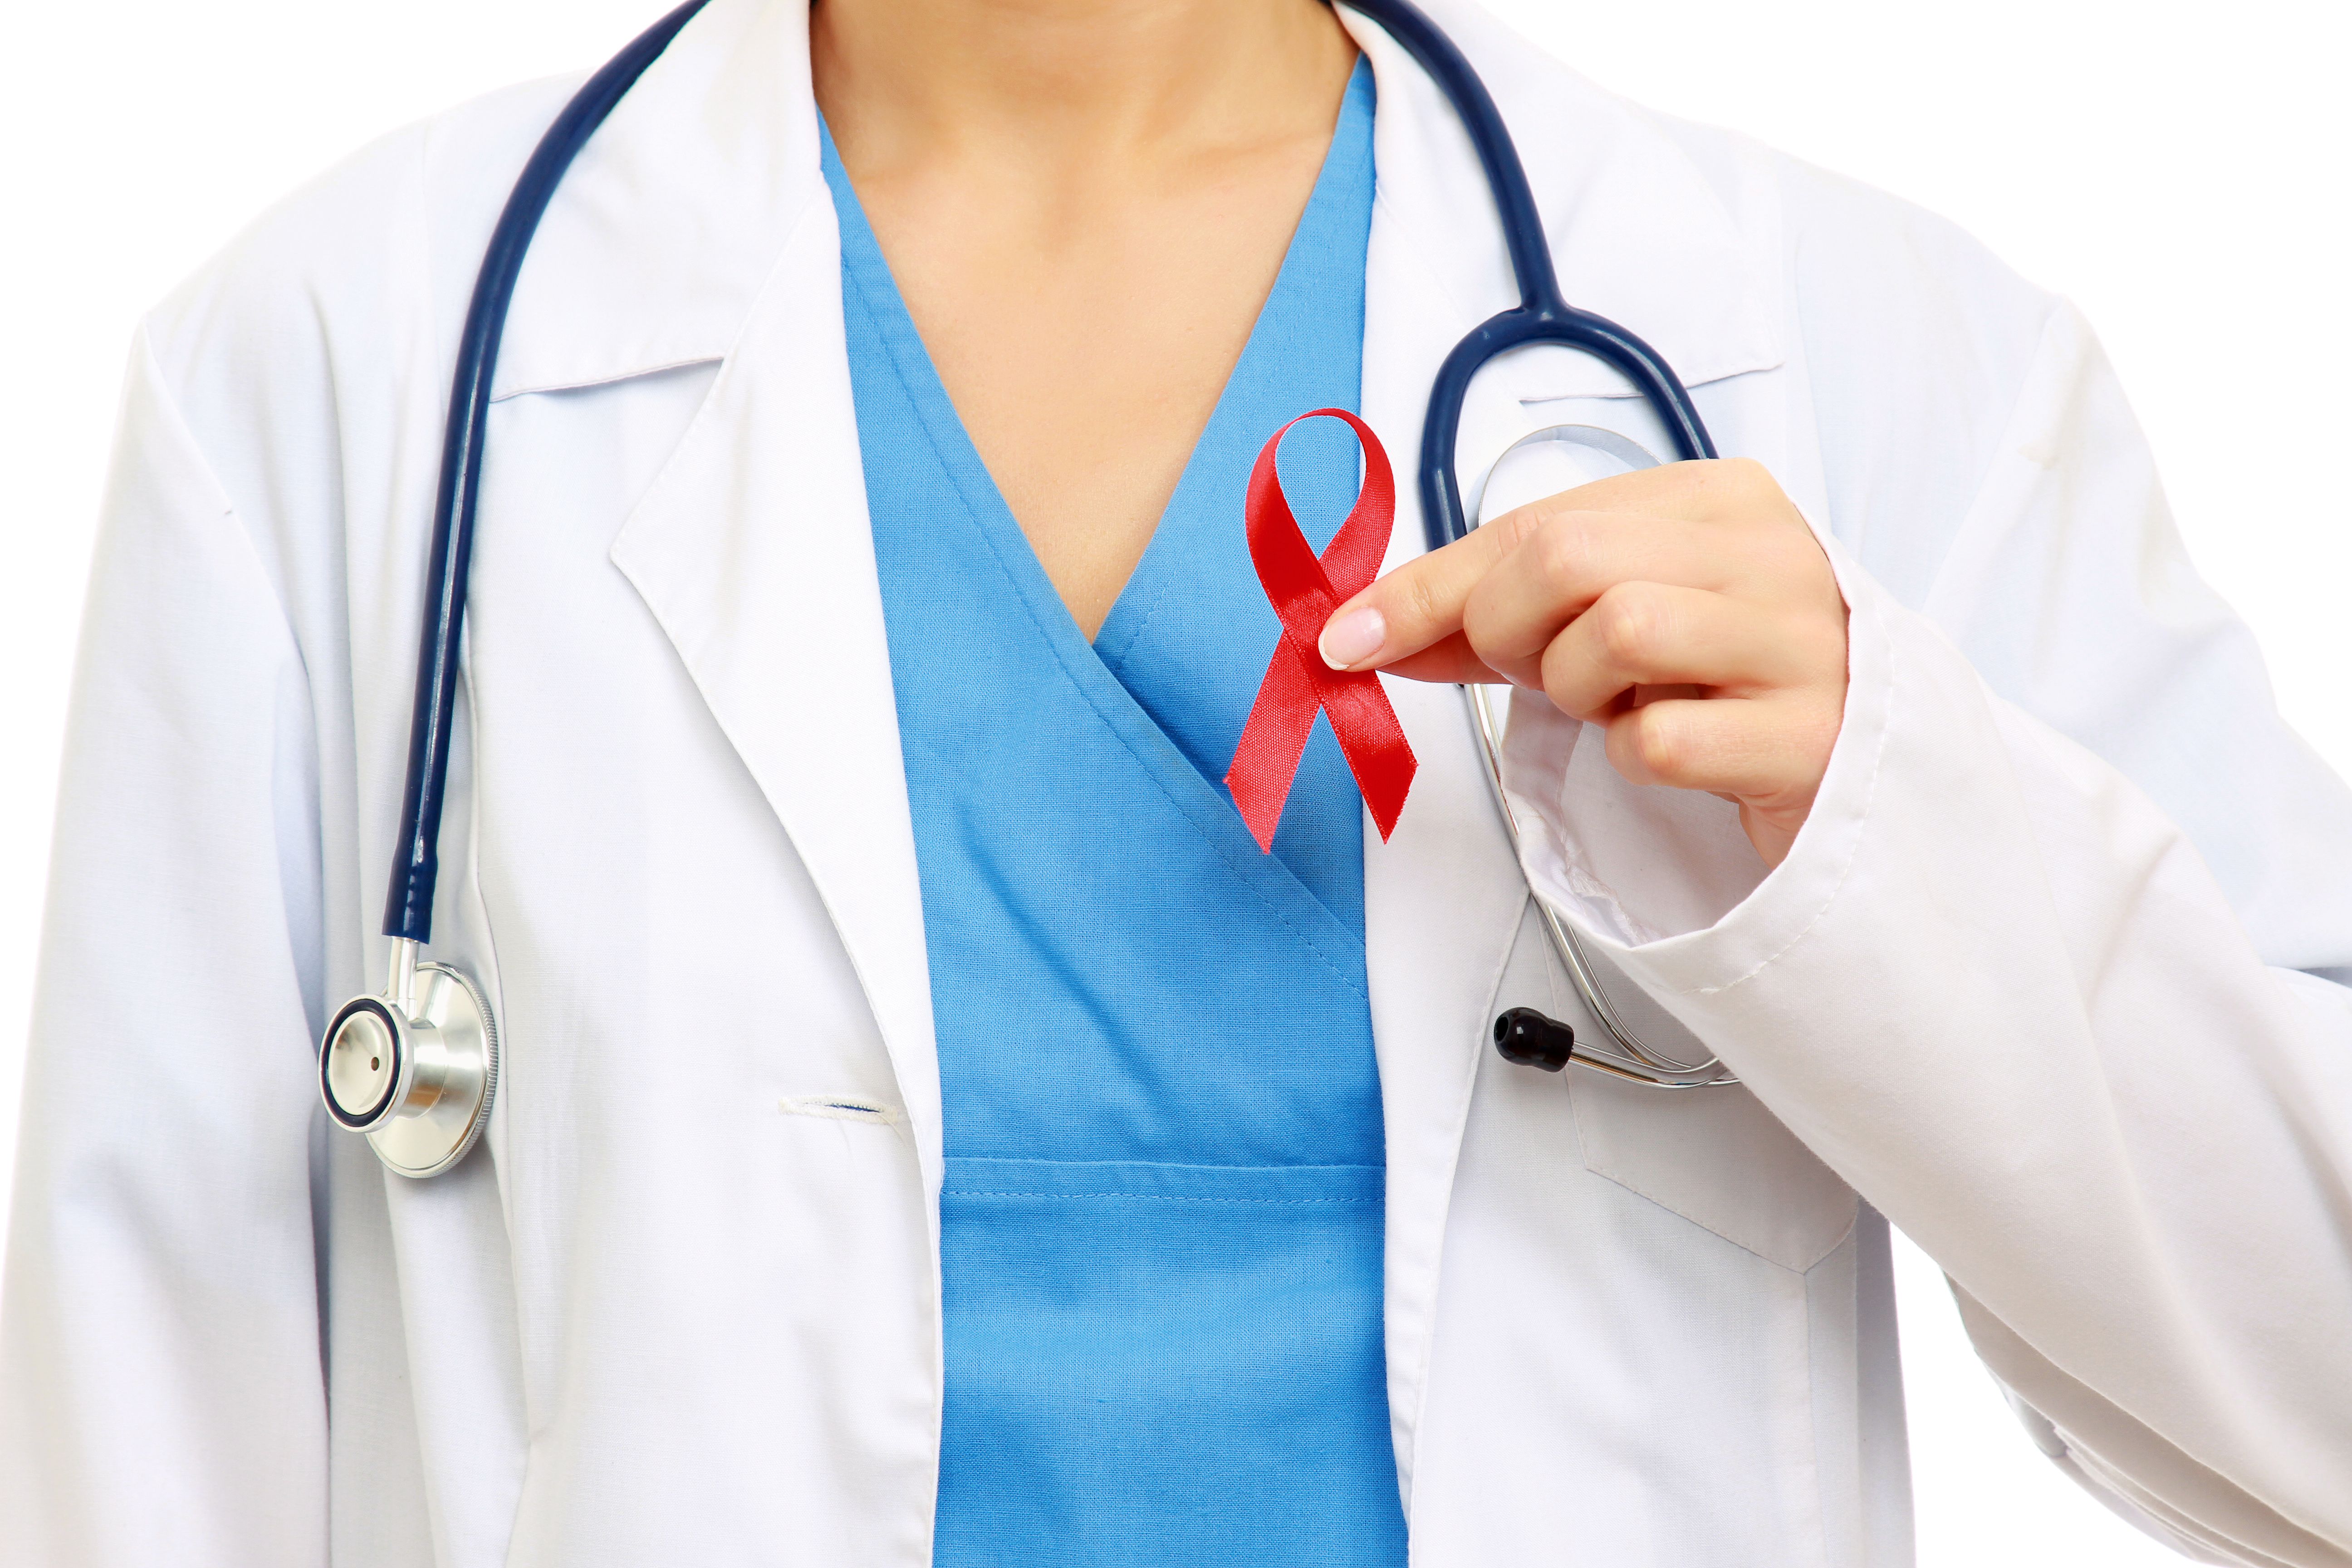 Patients Have Low Risk of Sexually Transmitting HIV With Viral Loads Less Than 1000 Copies/mL